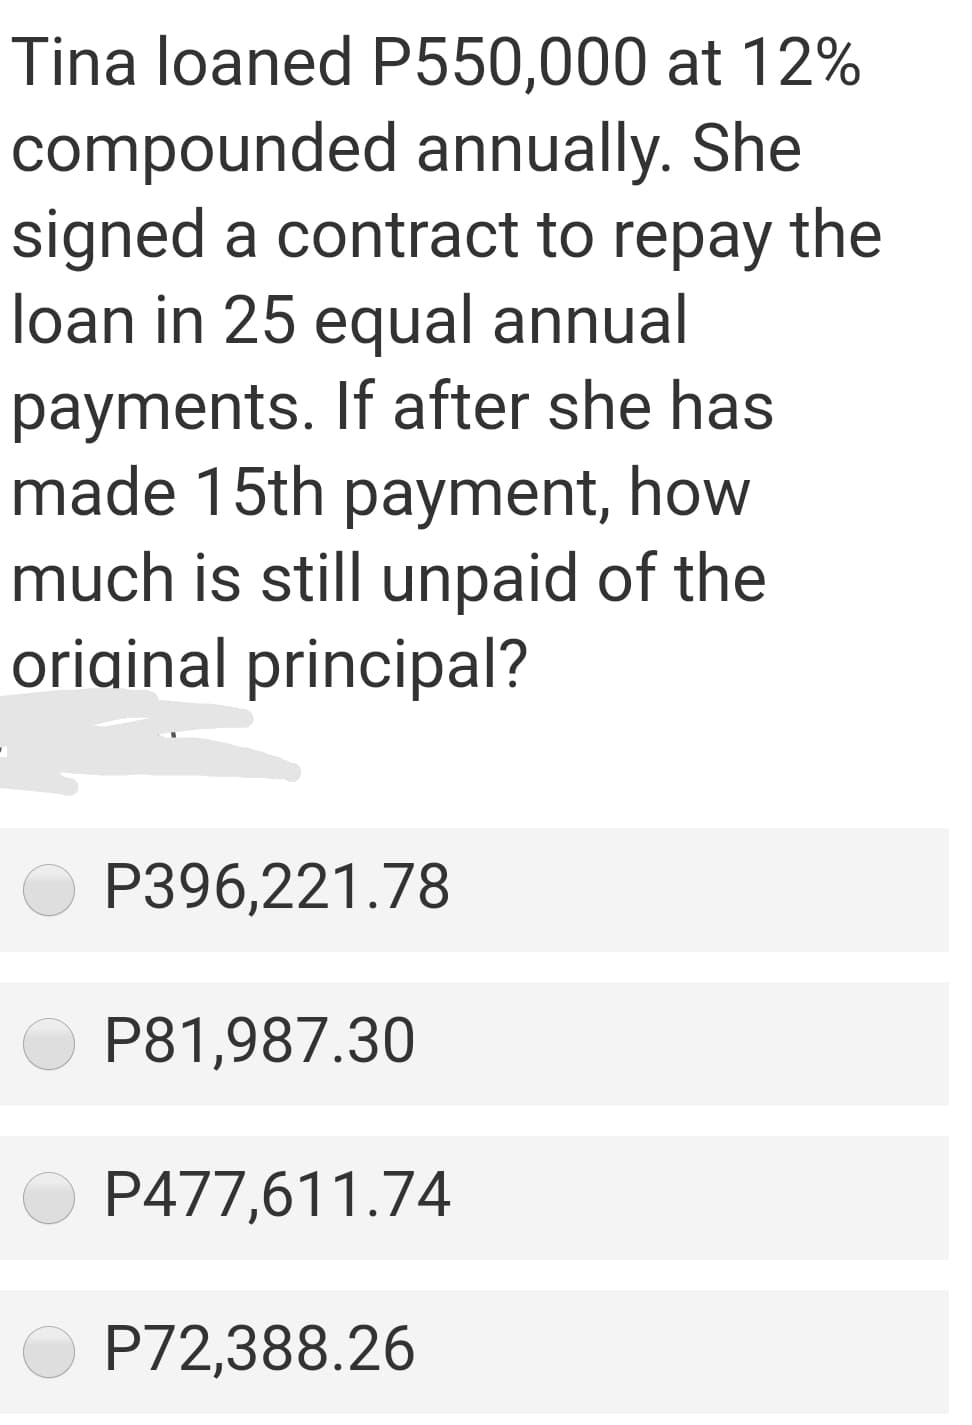 Tina loaned P550,000 at 12%
compounded annually. She
signed a contract to repay the
loan in 25 equal annual
payments. If after she has
made 15th payment, how
much is still unpaid of the
original principal?
P396,221.78
P81,987.30
P477,611.74
P72,388.26
